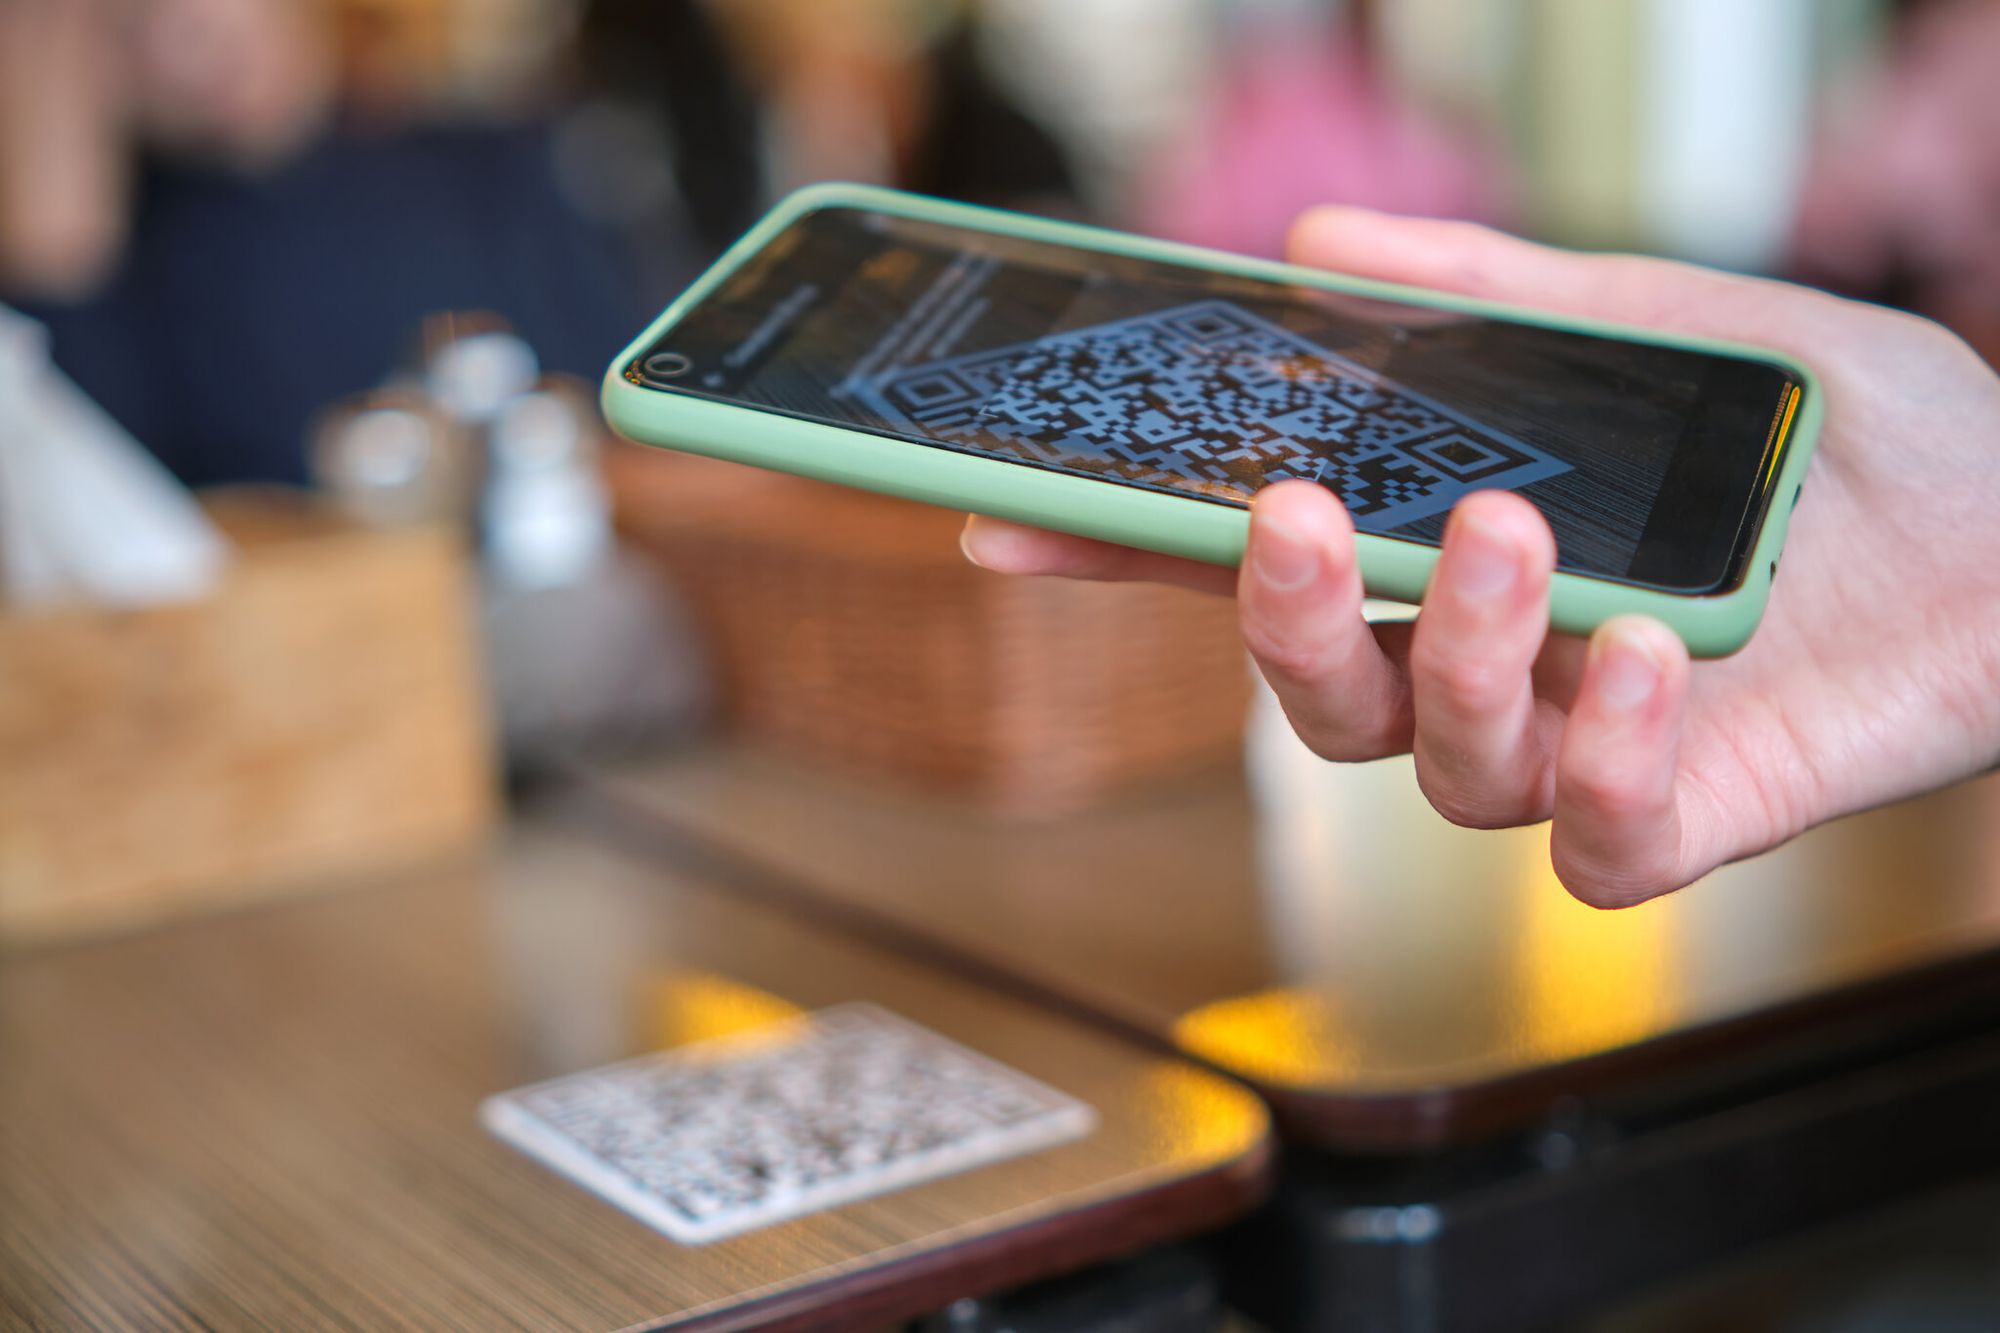 Close-up of a hand scanning a QR code on a table